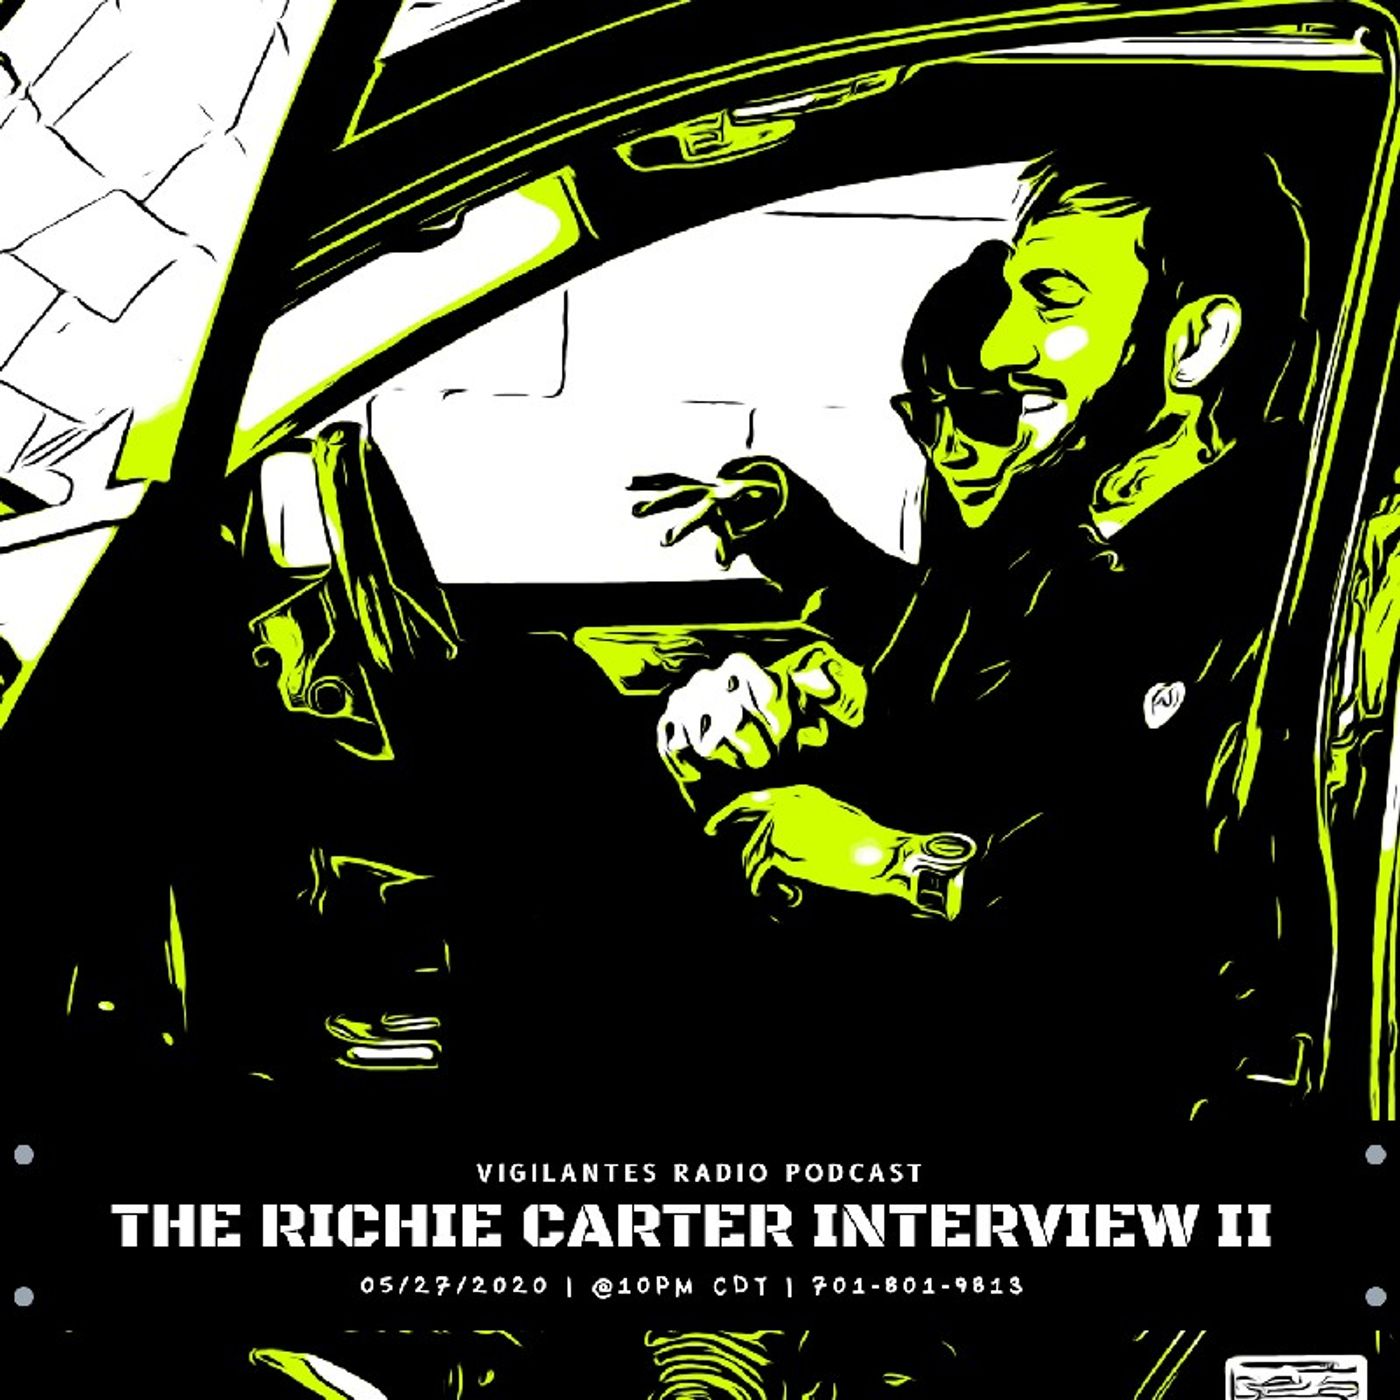 The Richie Carter Interview II. Image